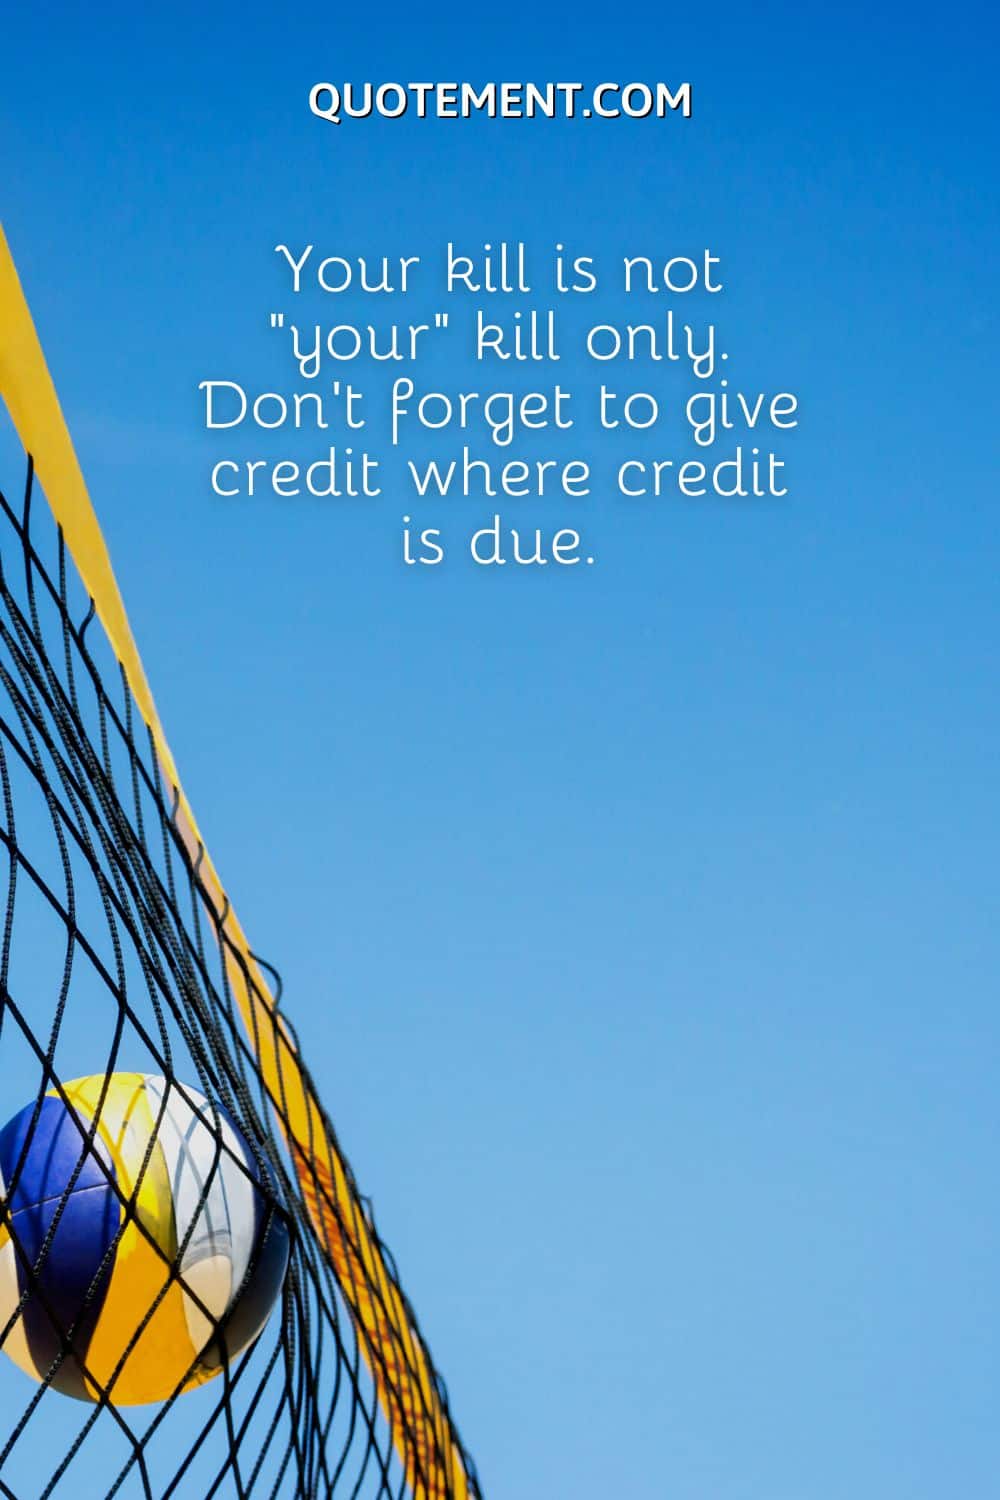 Your kill is not “your” kill only. Don’t forget to give credit where credit is due.